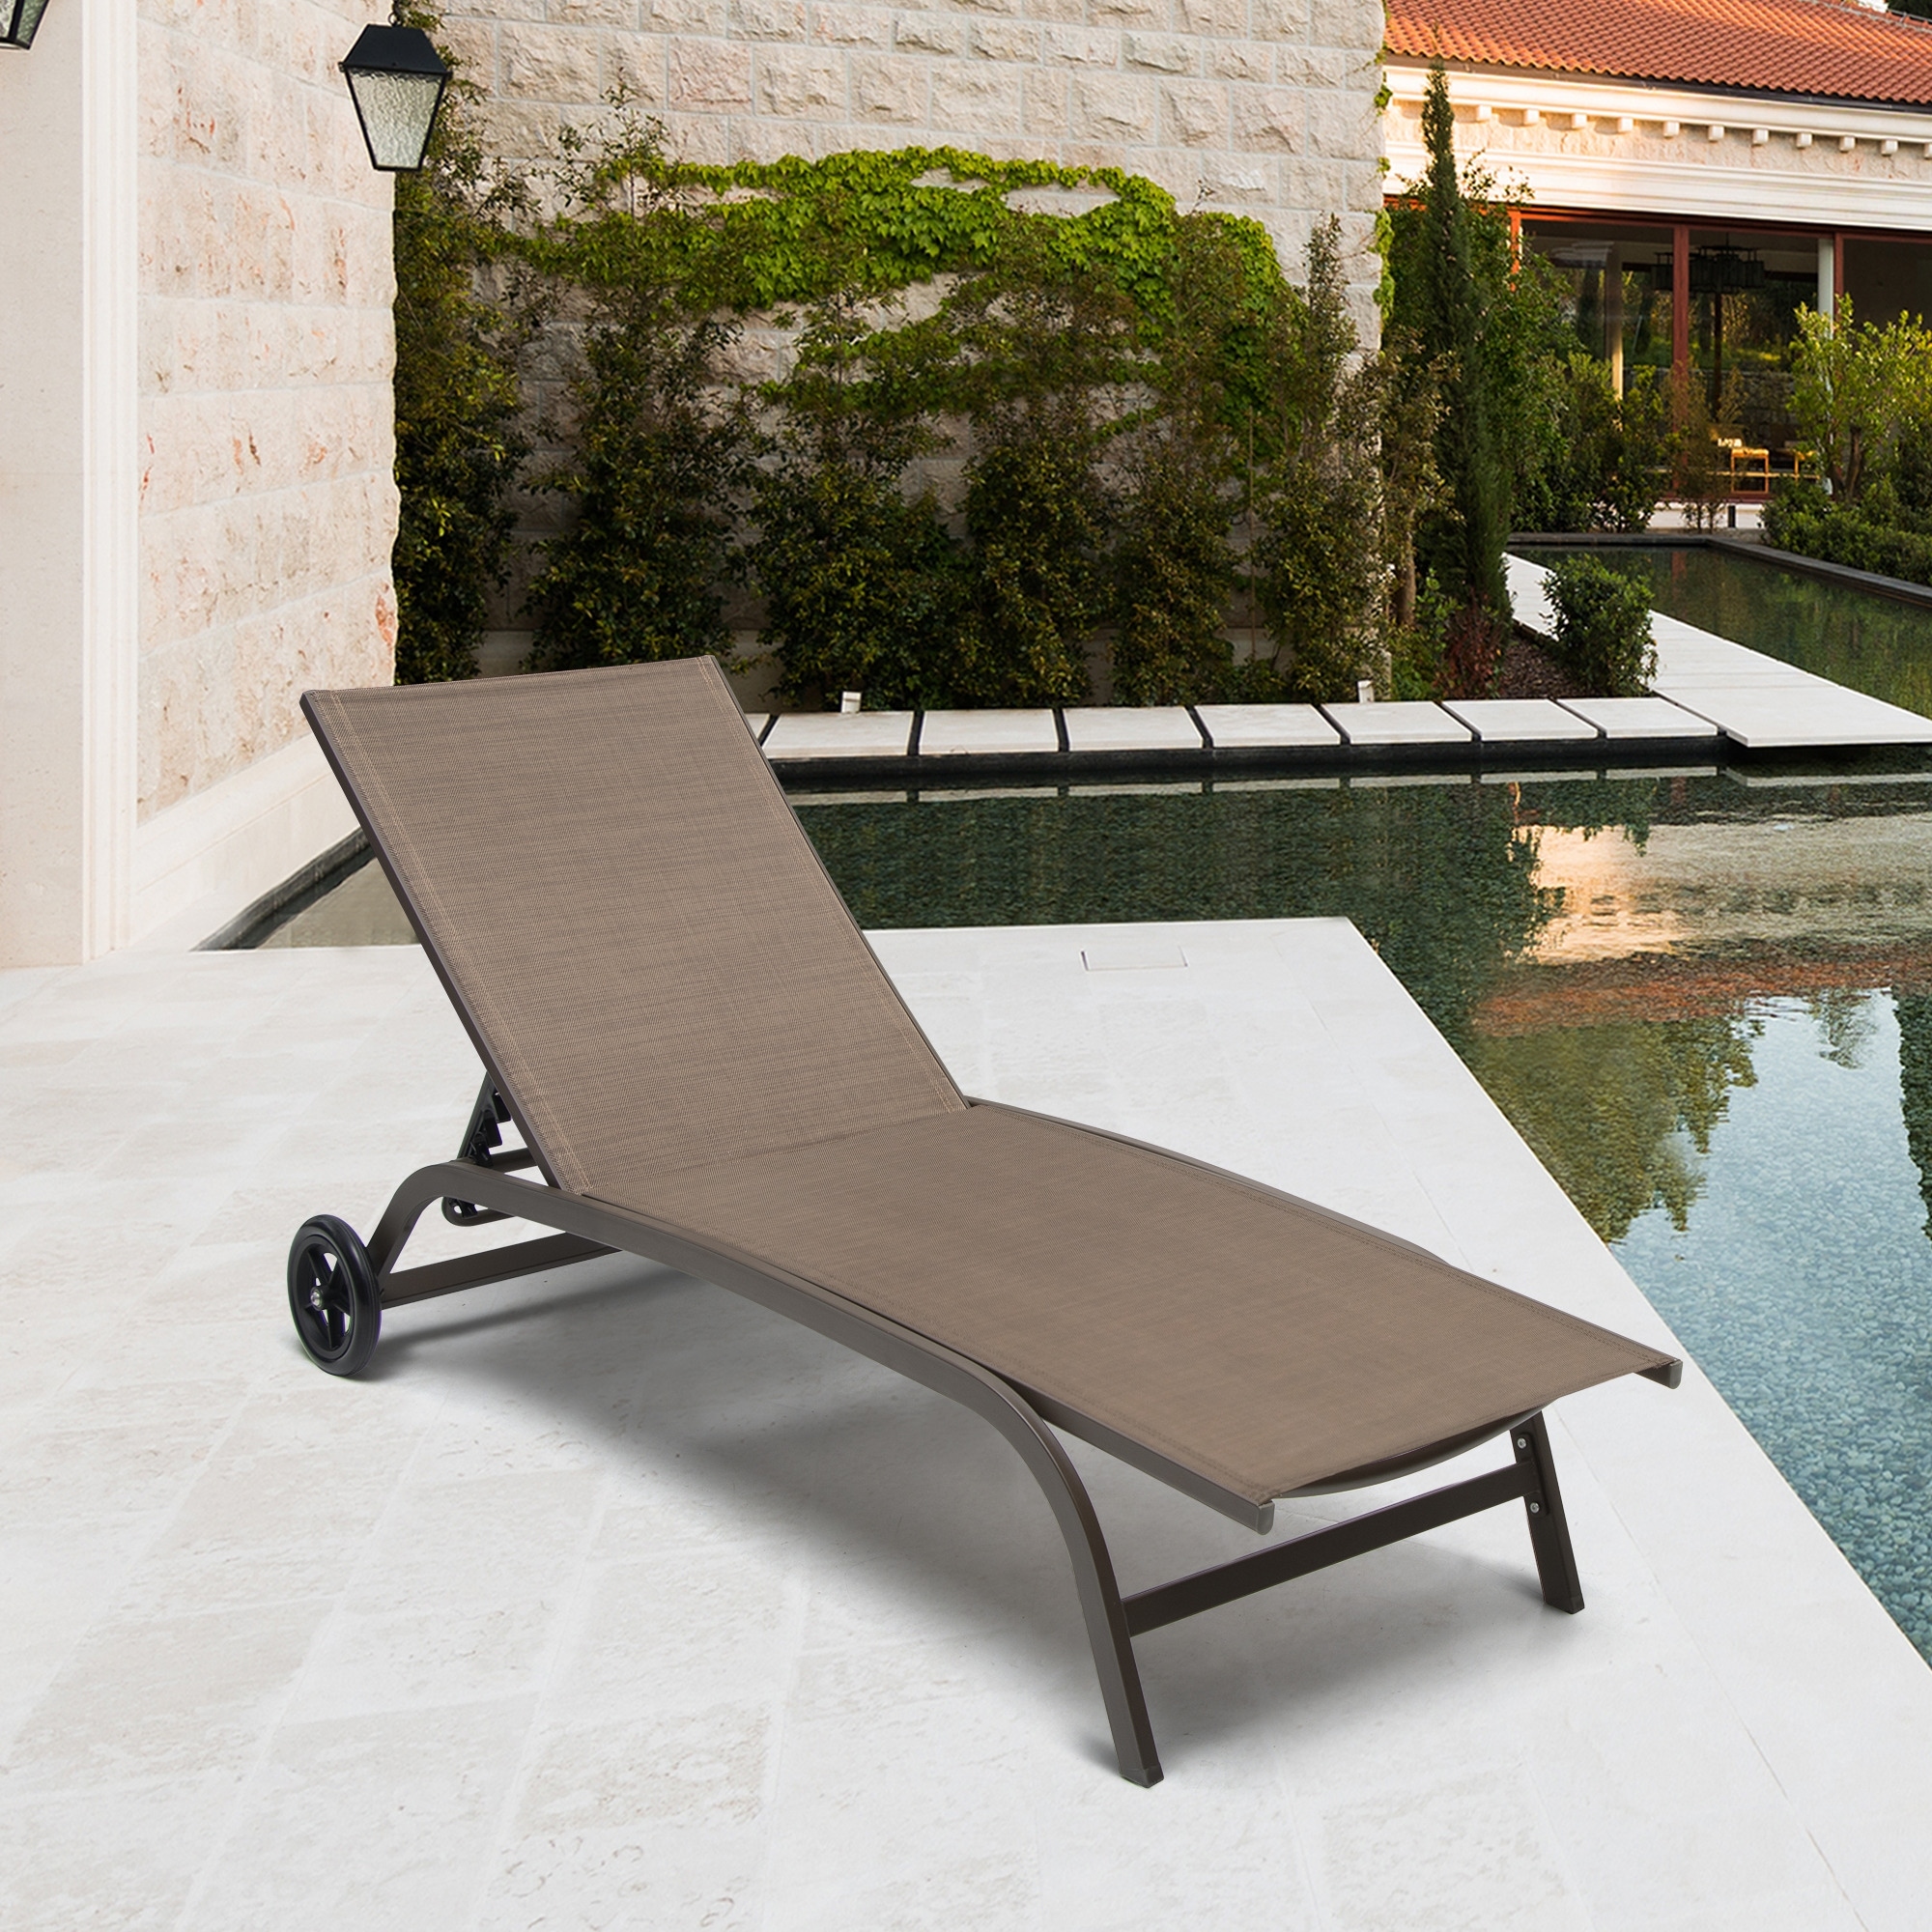 Pellebant Full Flat Outdoor Chaise Lounge Chair With Wheels - N/a